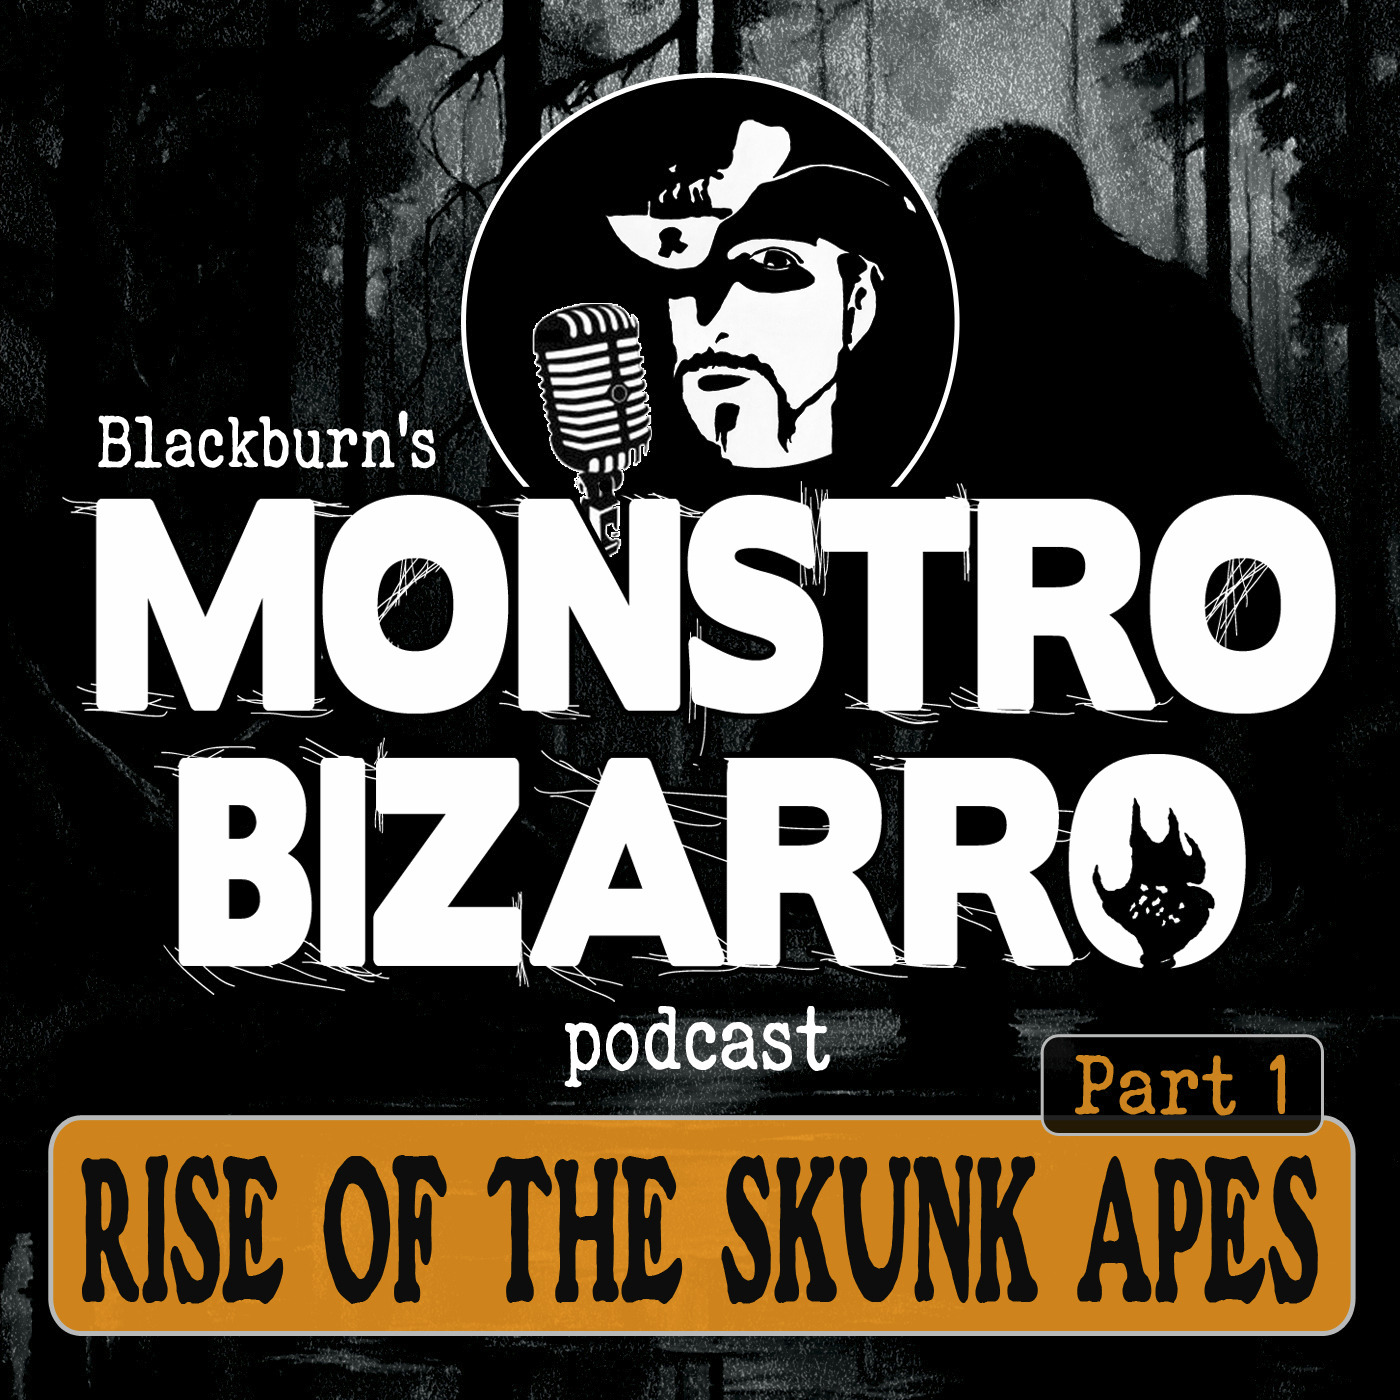 Rise of the Skunk Apes (Part 1)